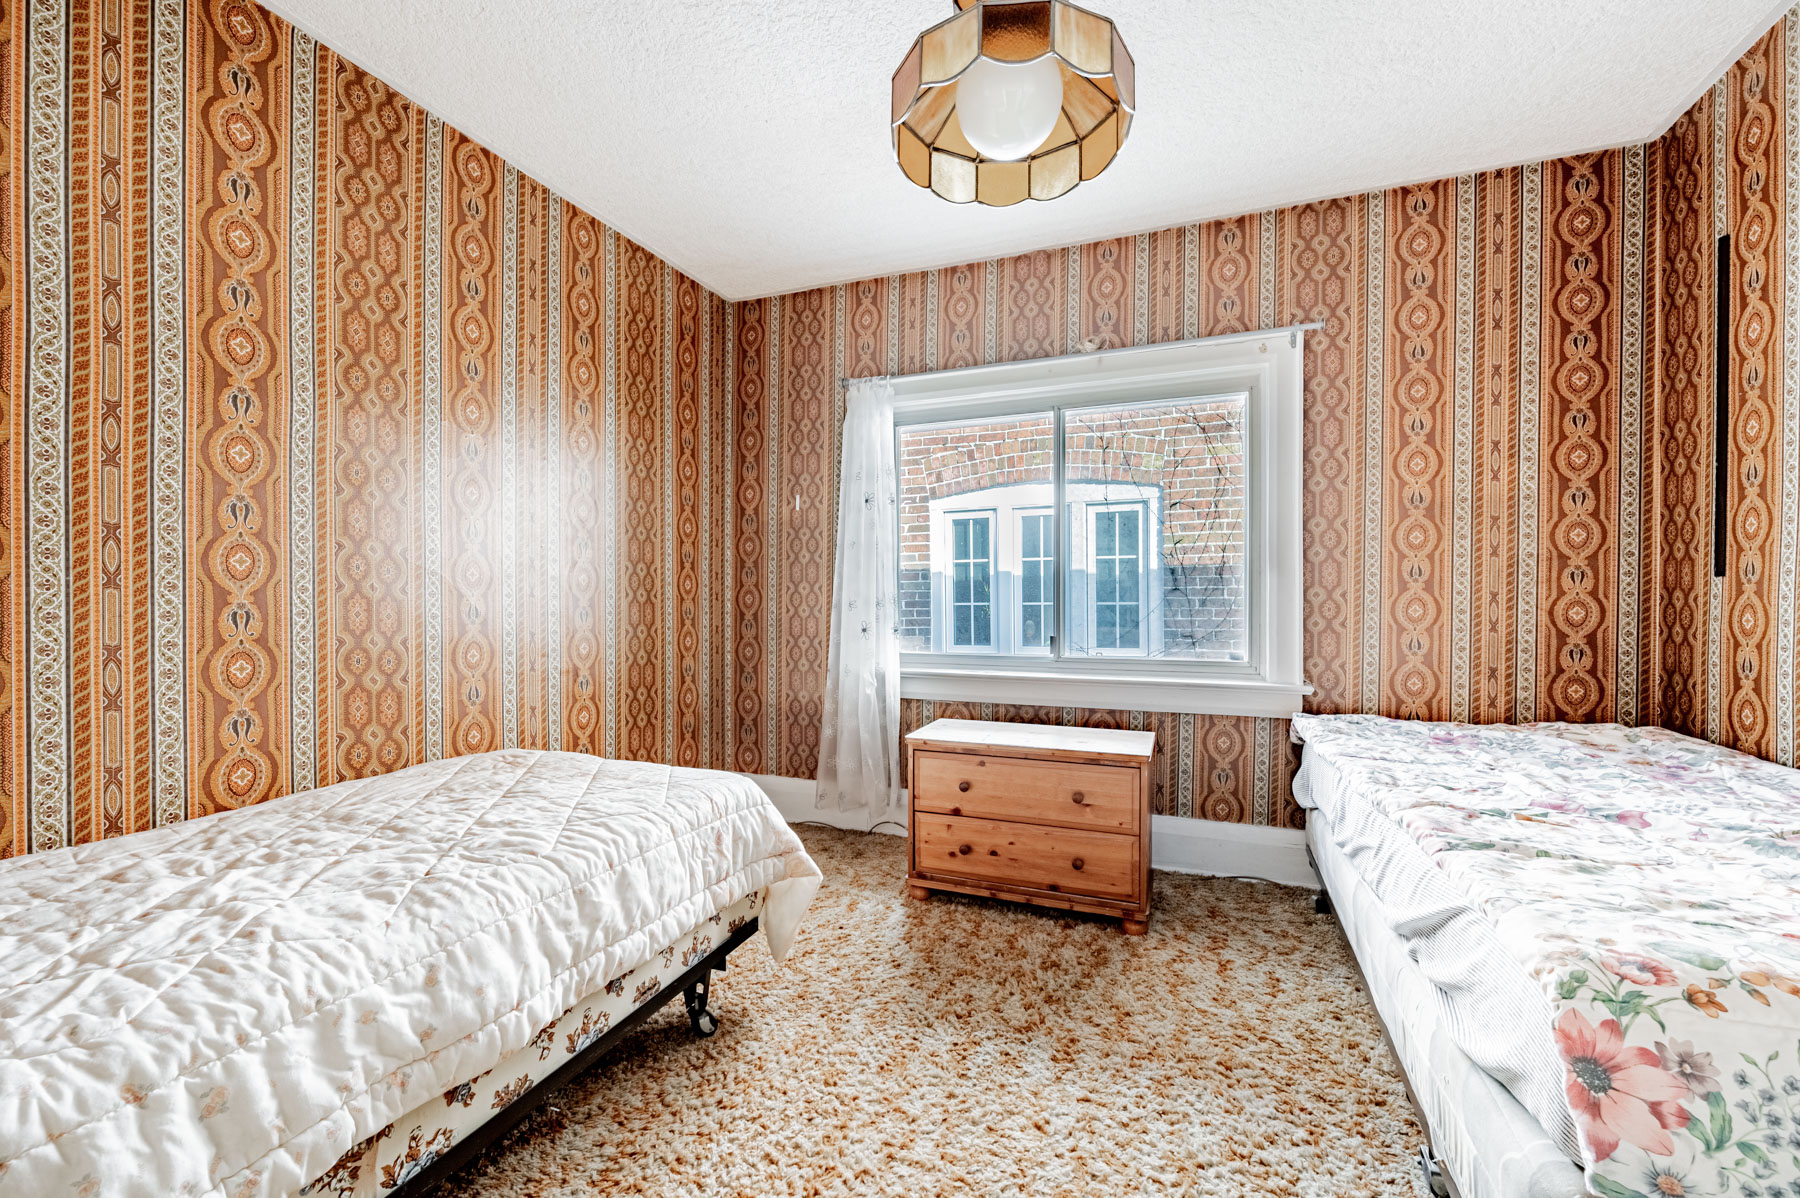 Bedroom with broadloom floors, 2 beds, ornate wallpaper and window – 35 Woburn Ave.